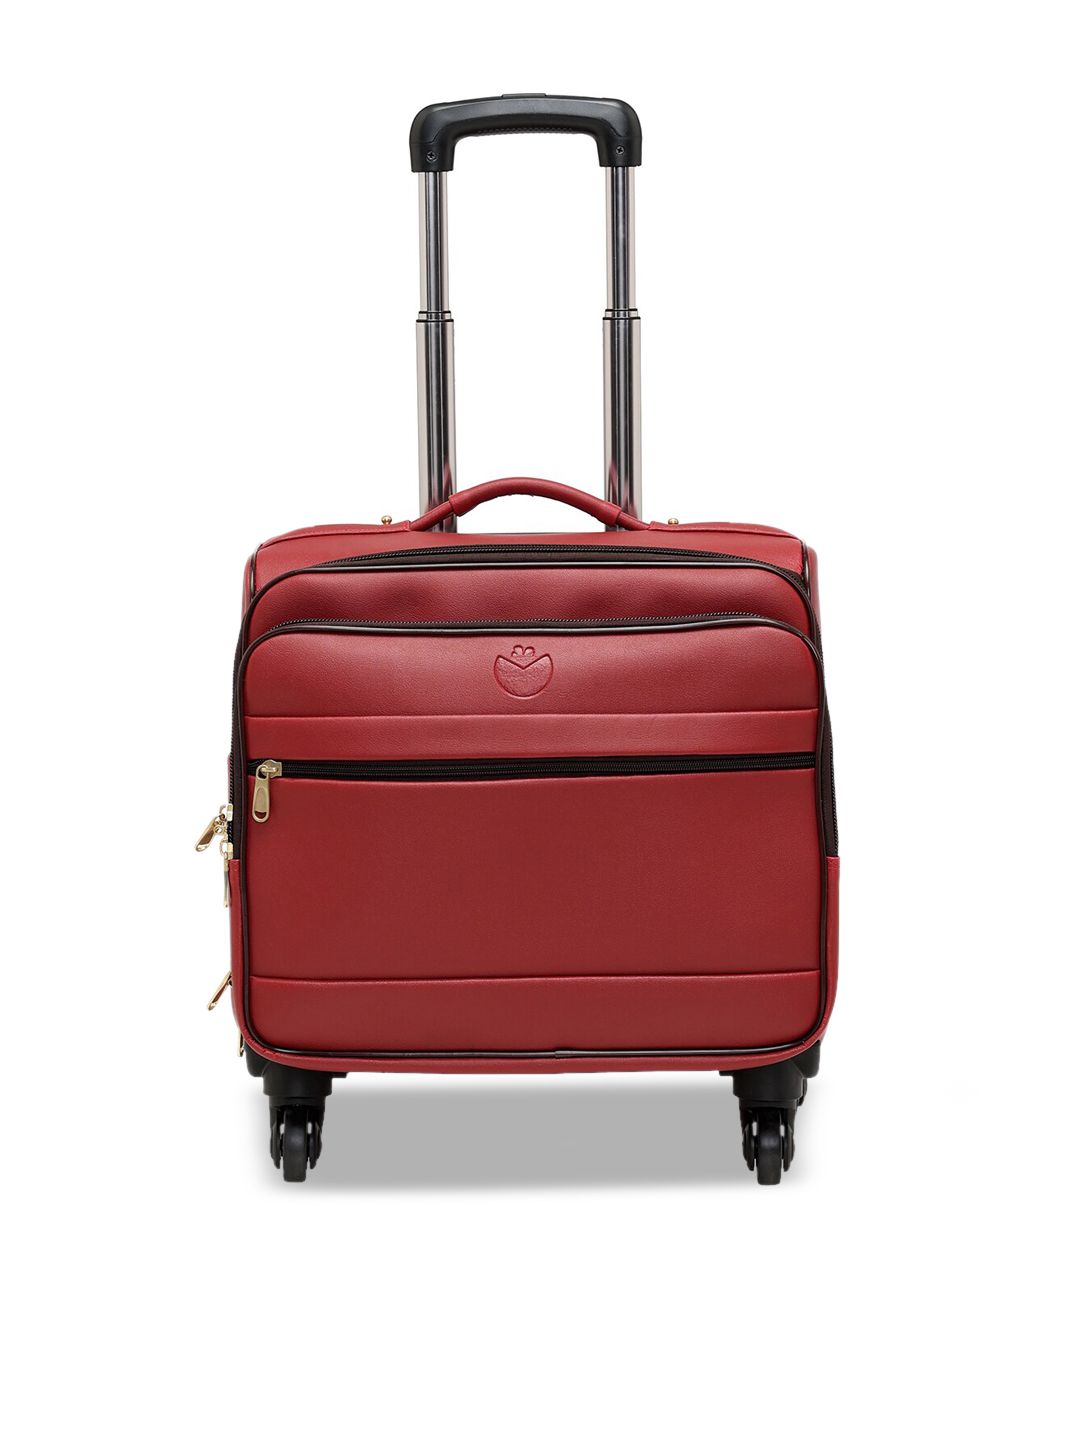 MBOSS Red Solid Soft-Sided Cabin Laptop Overnighter Trolley Suitcase Price in India